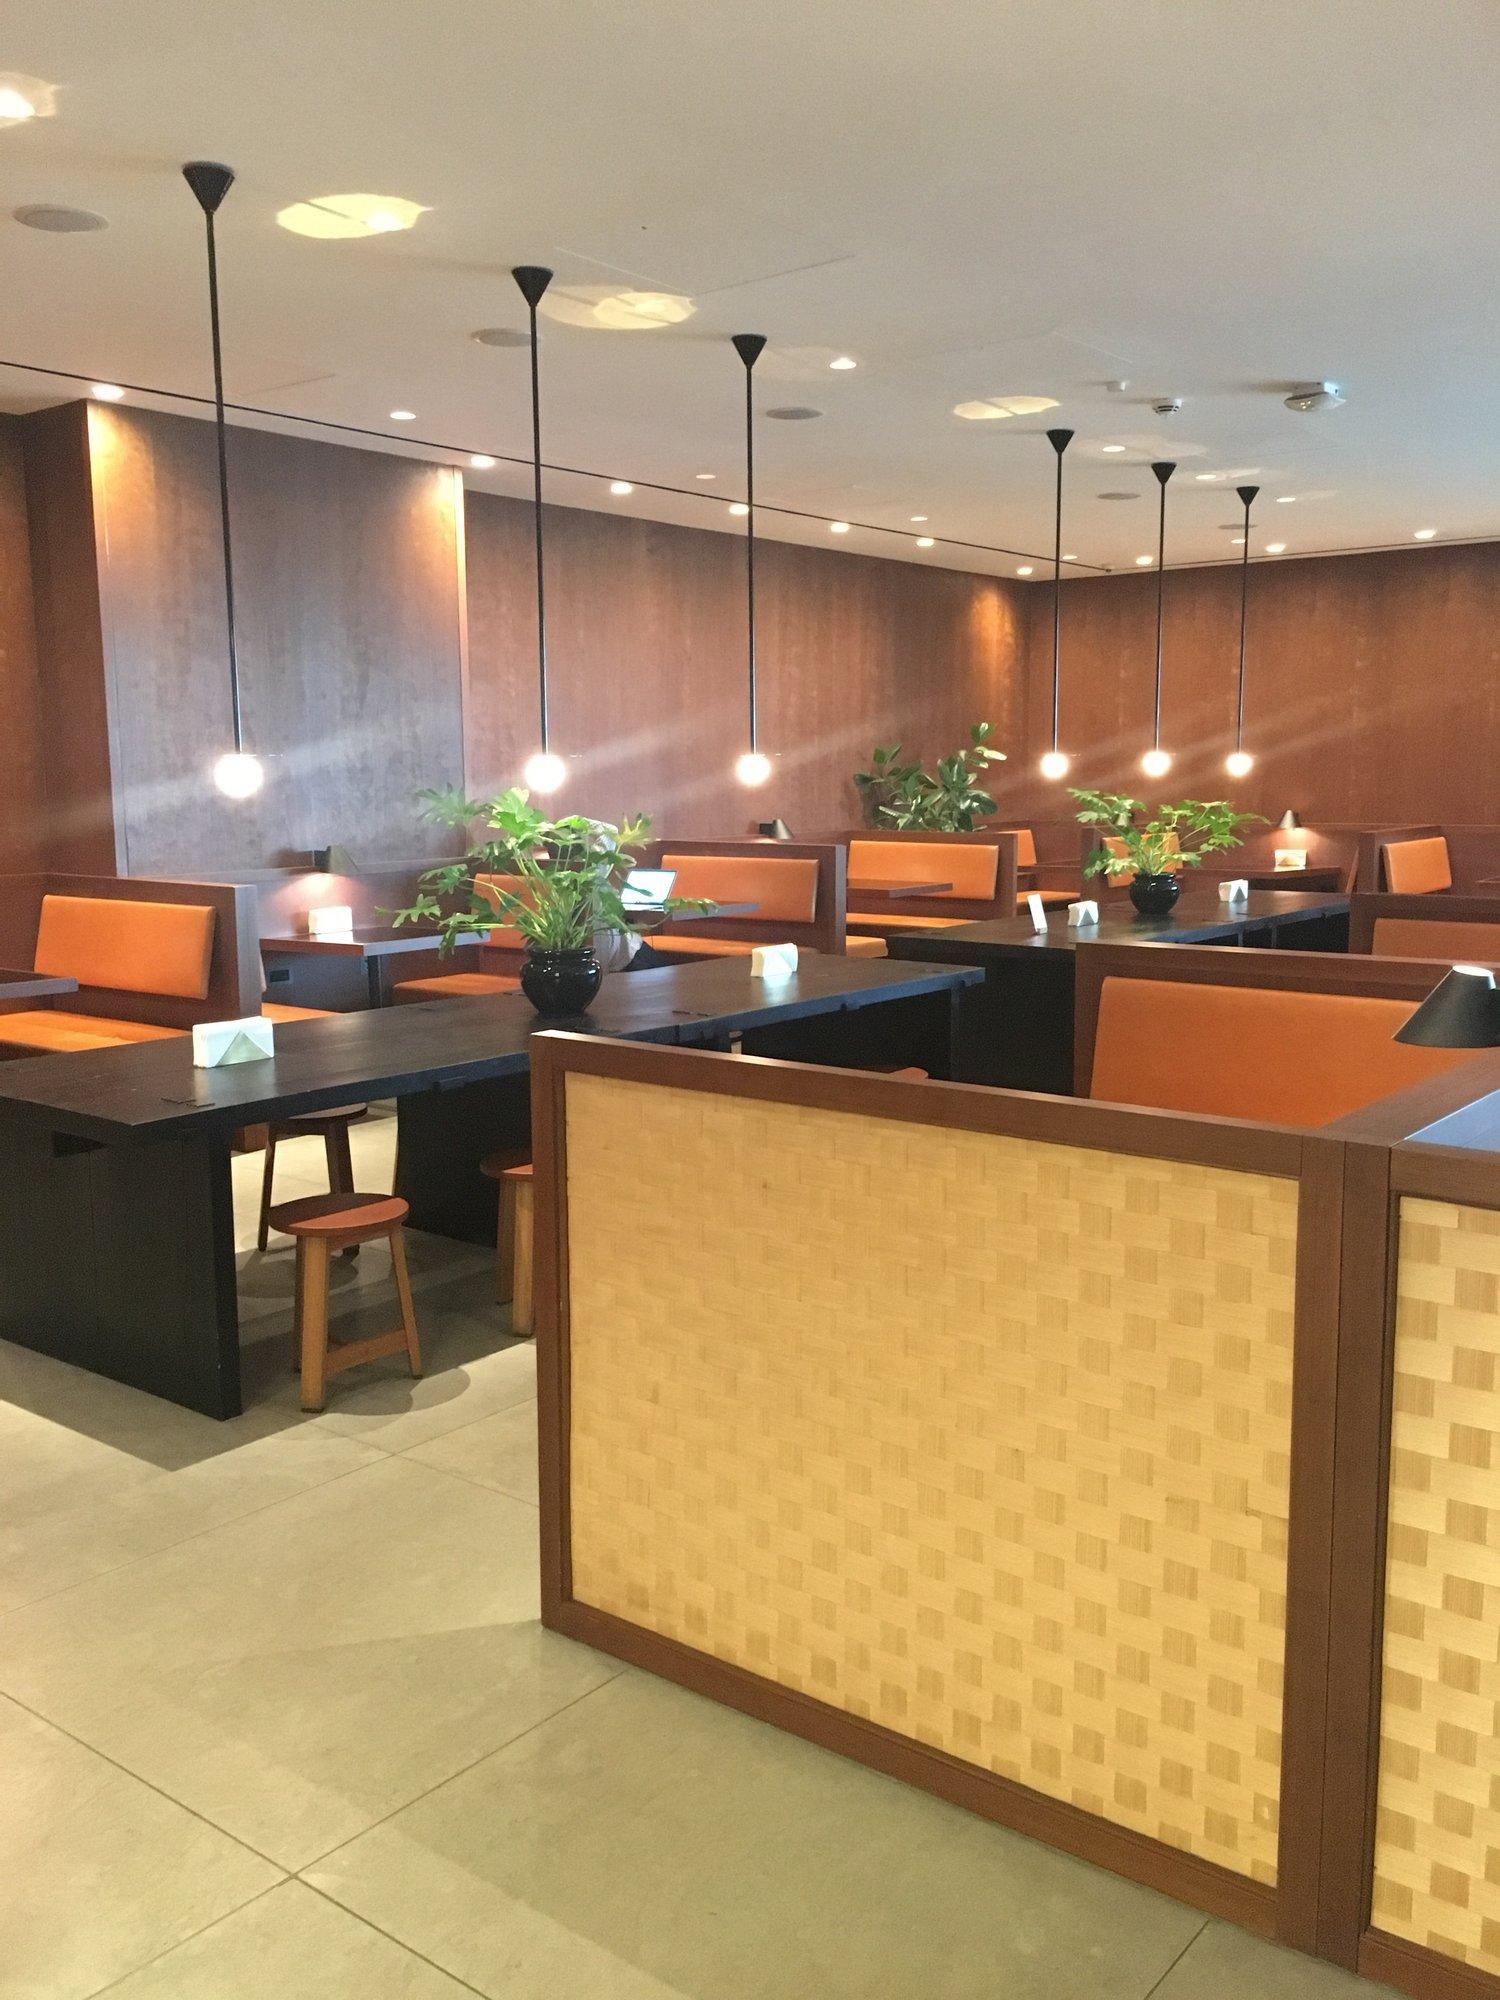 Cathay Pacific Business Class Lounge image 23 of 48